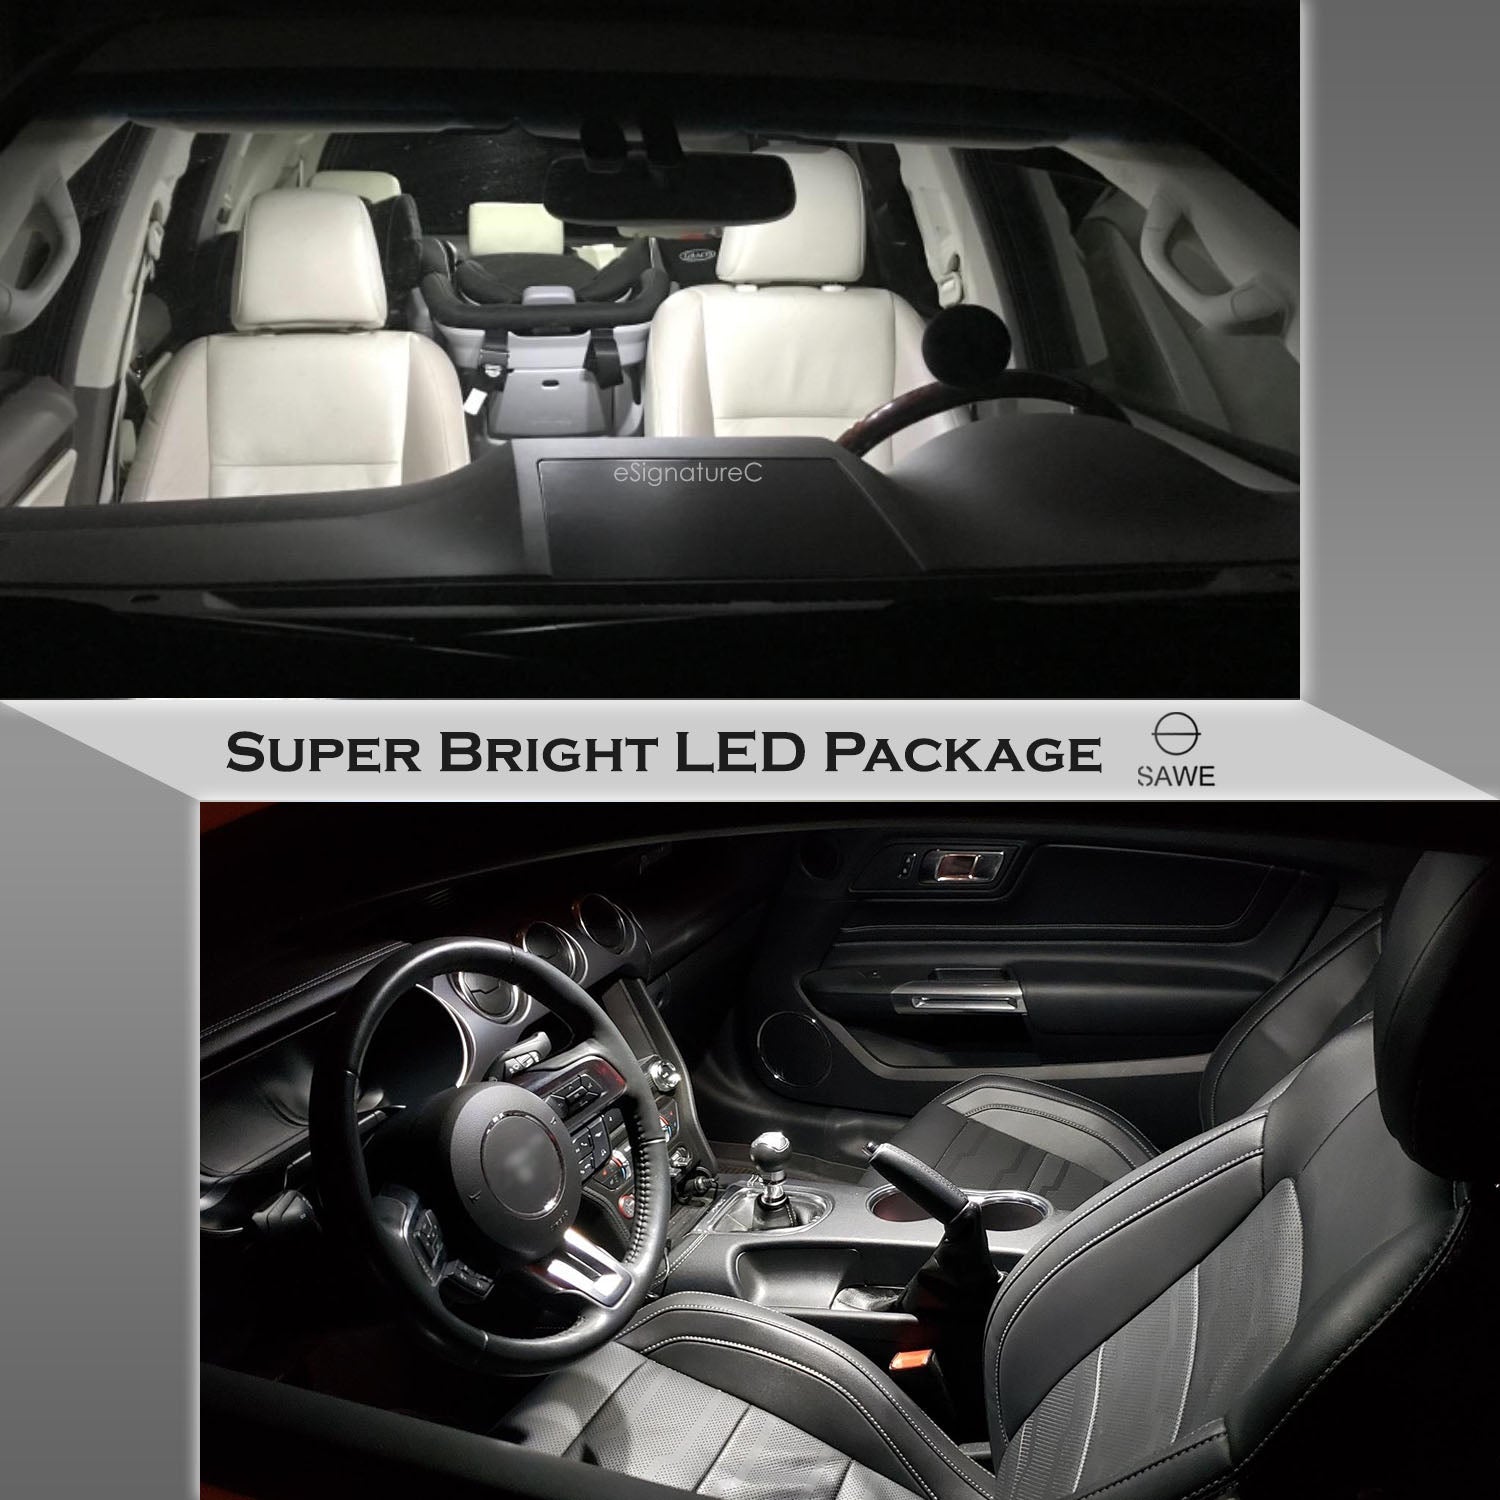 For Hyundai Accent Interior LED Lights - Dome & Map Light Bulbs Package Kit for 2006 - 2011 - White